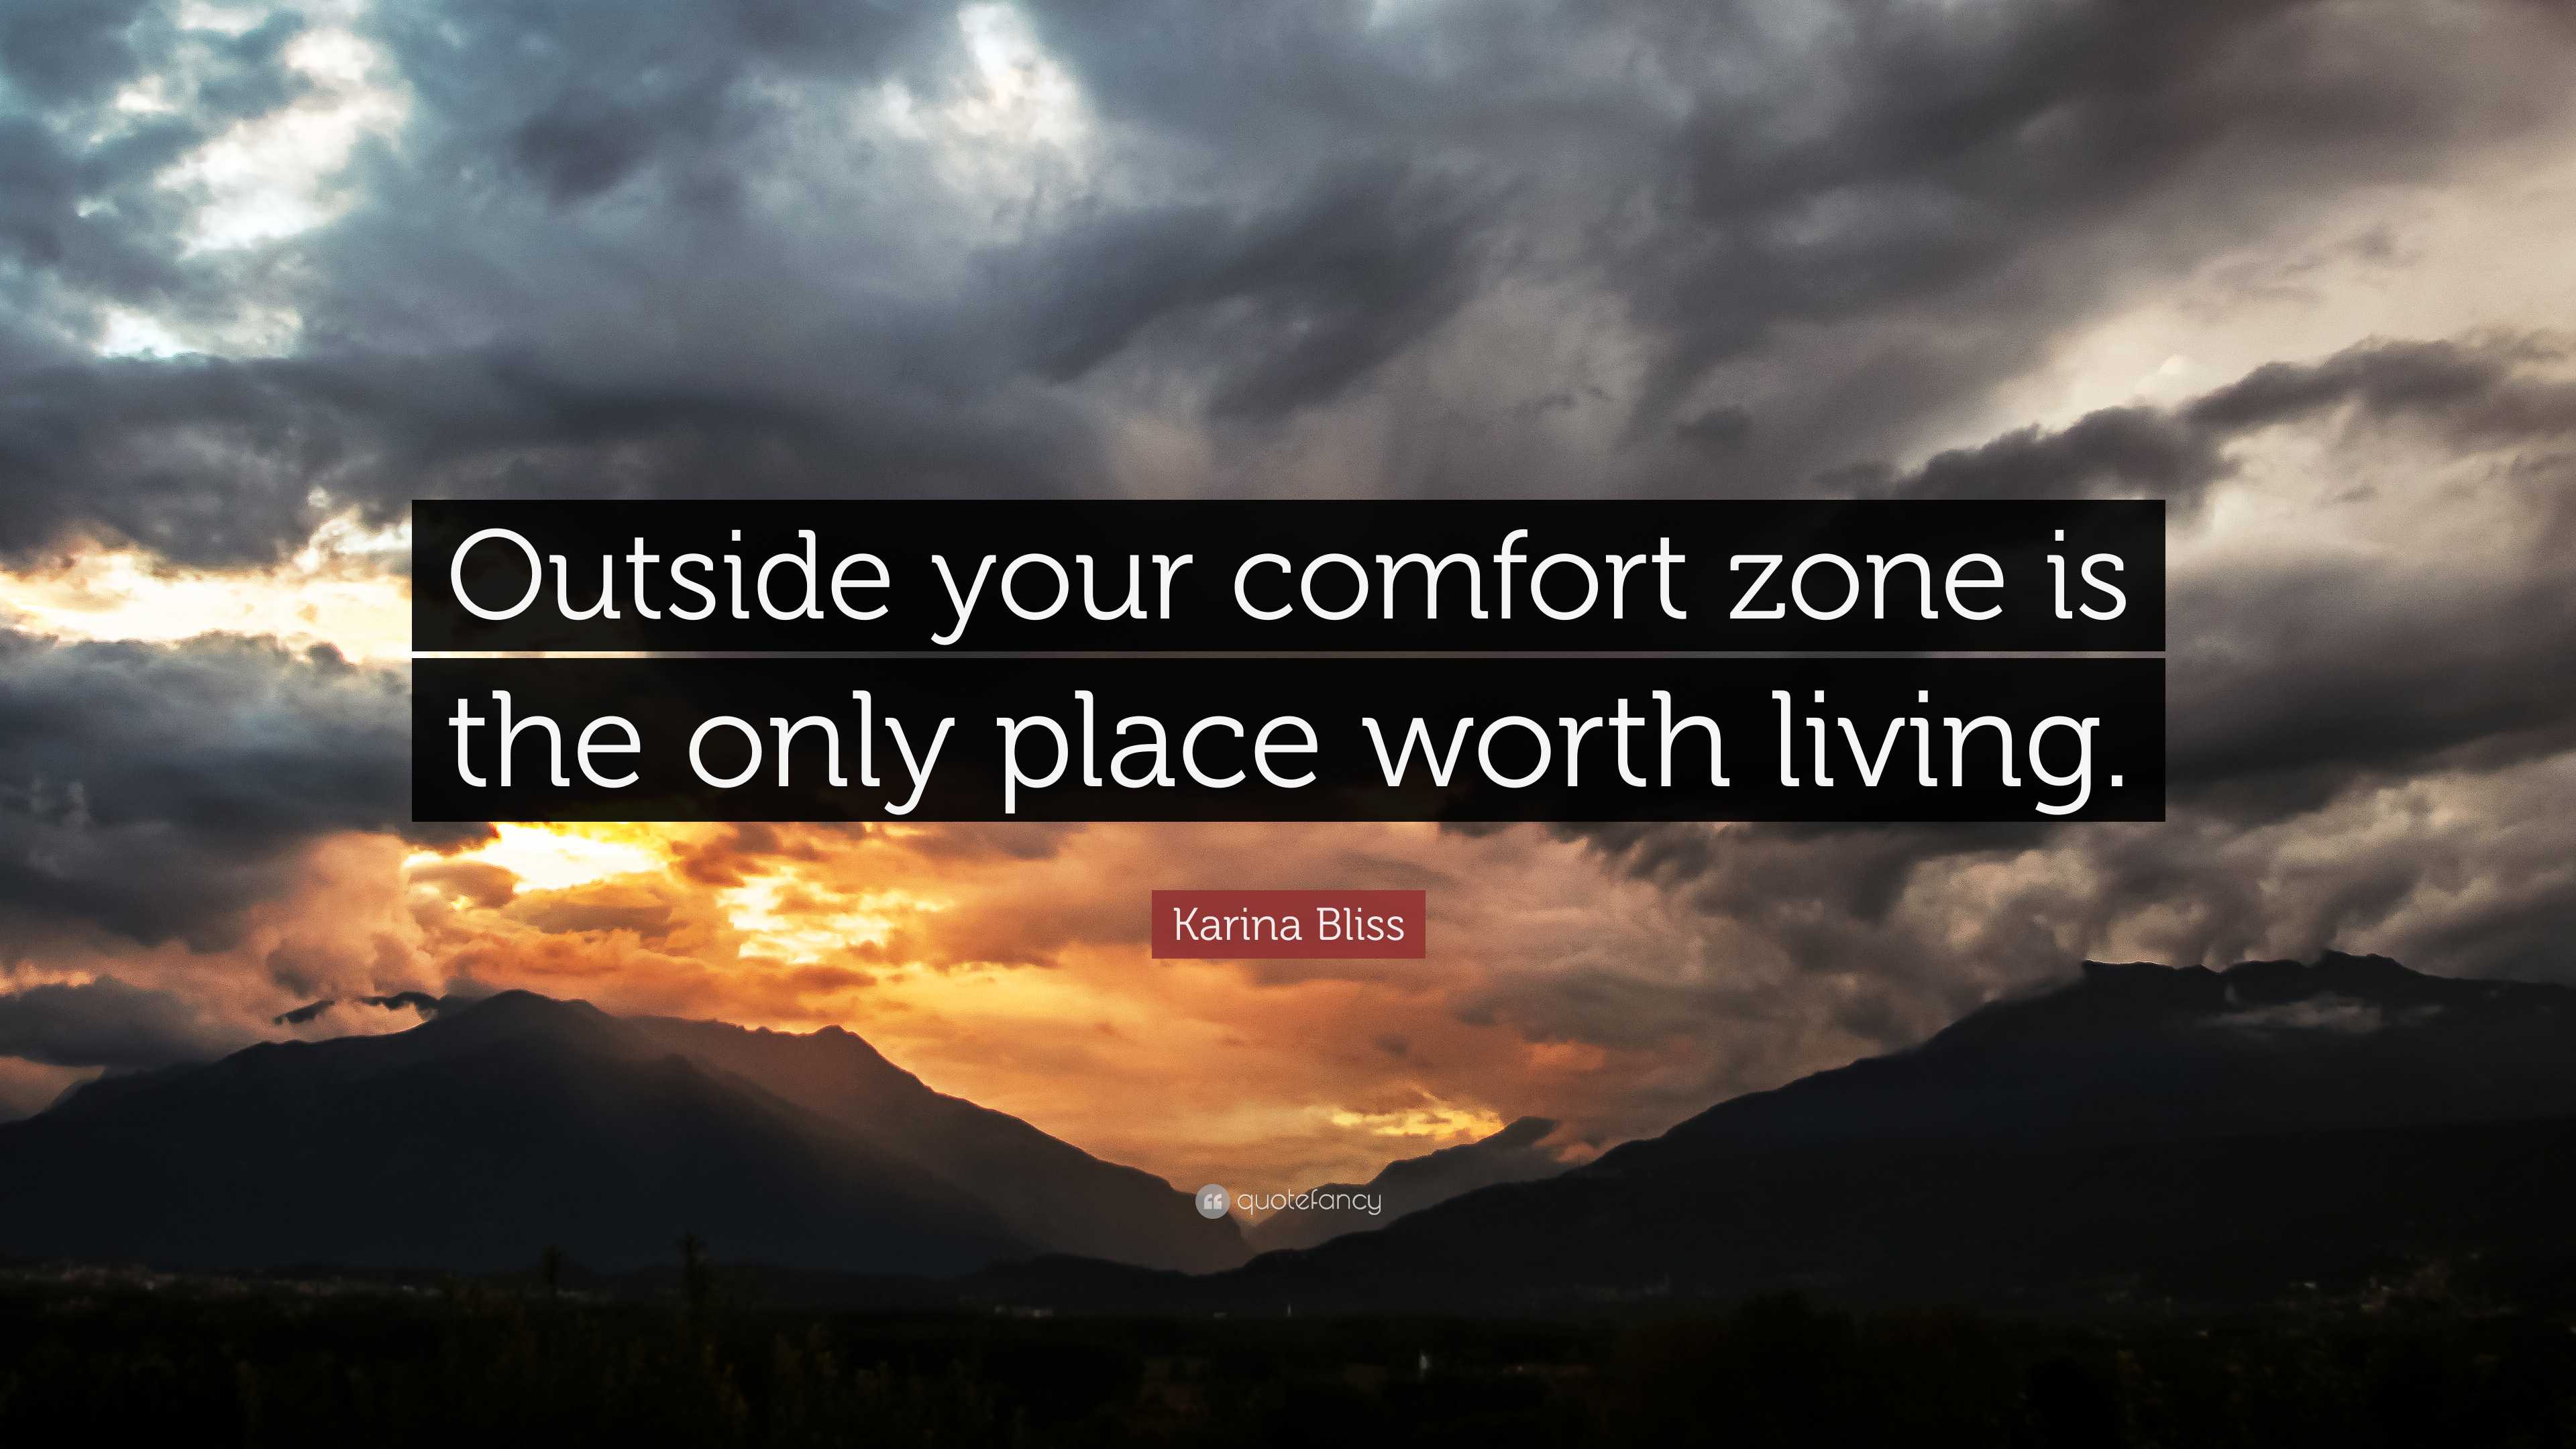 Karina Bliss Quote: “Outside your comfort zone is the only place worth  living.”